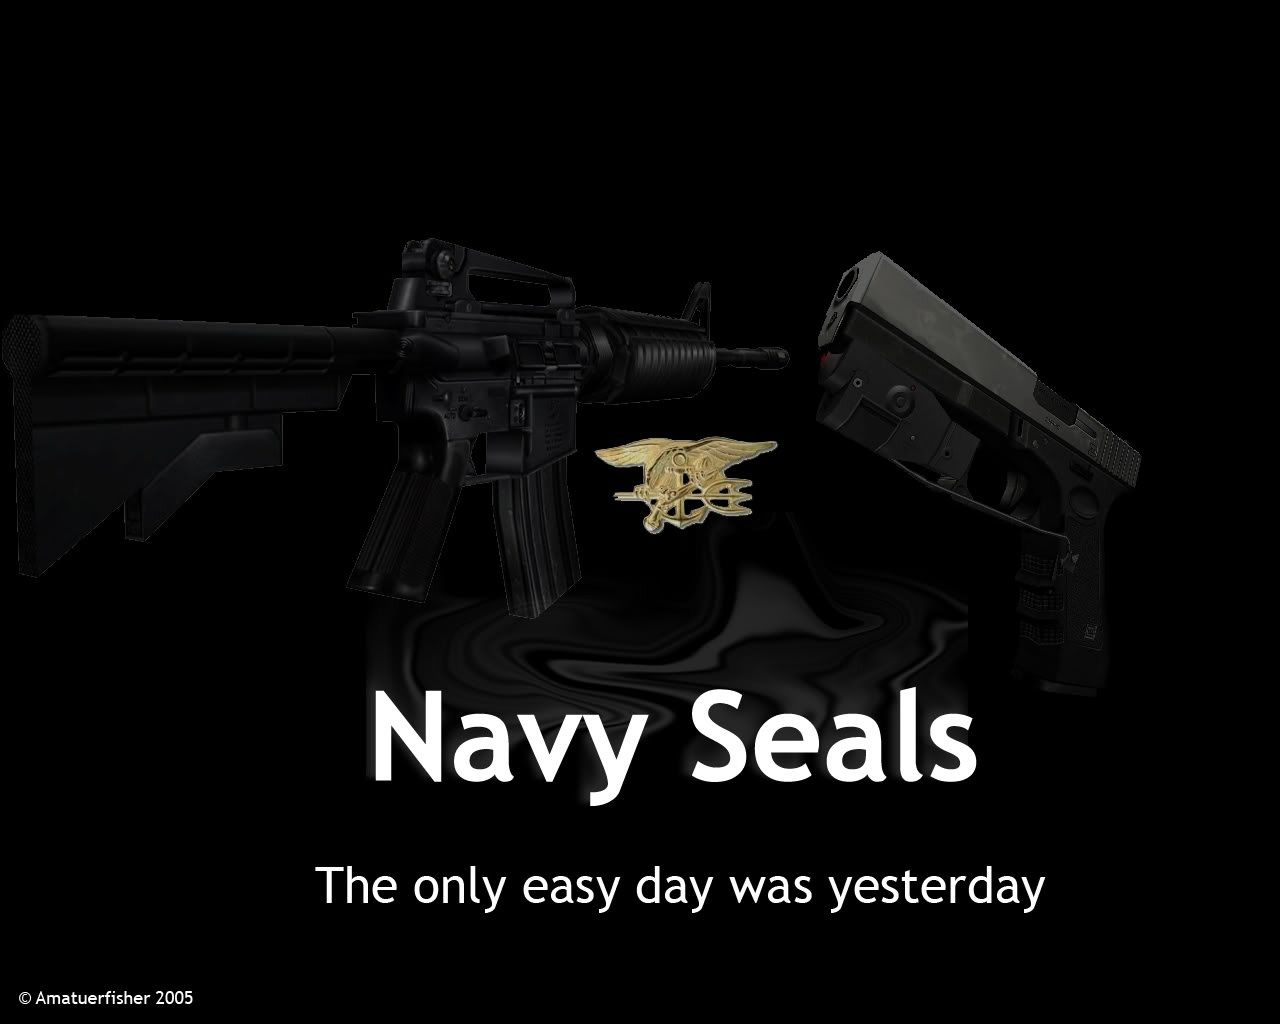 Navy Seal Wallpapers HDQ Navy Seal Images Collection for Desktop